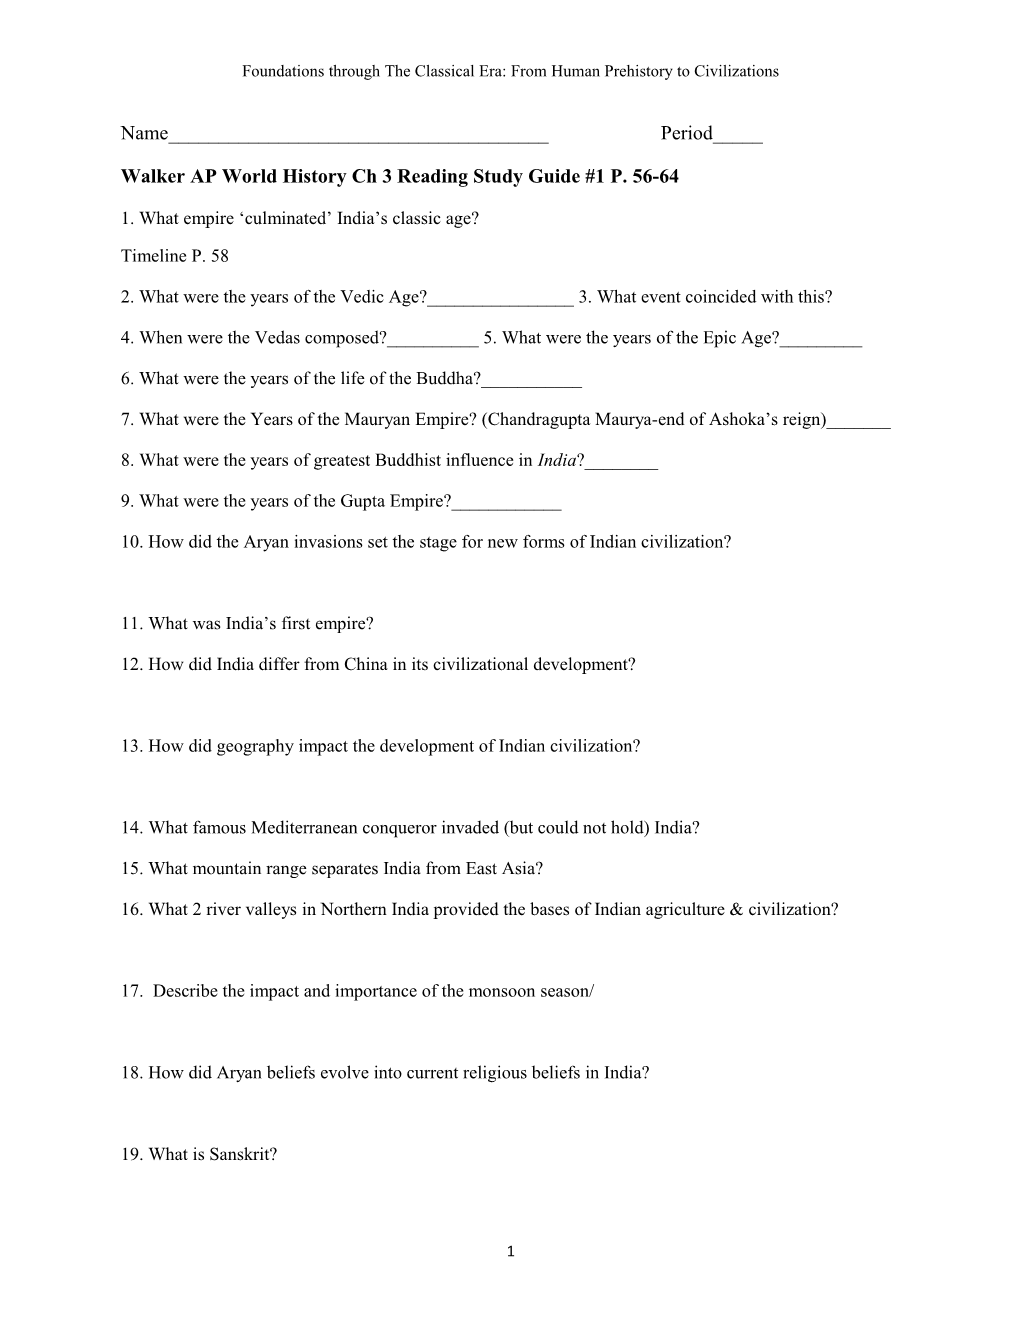 Walker AP World History Ch 3Reading Study Guide #1 P.56-64